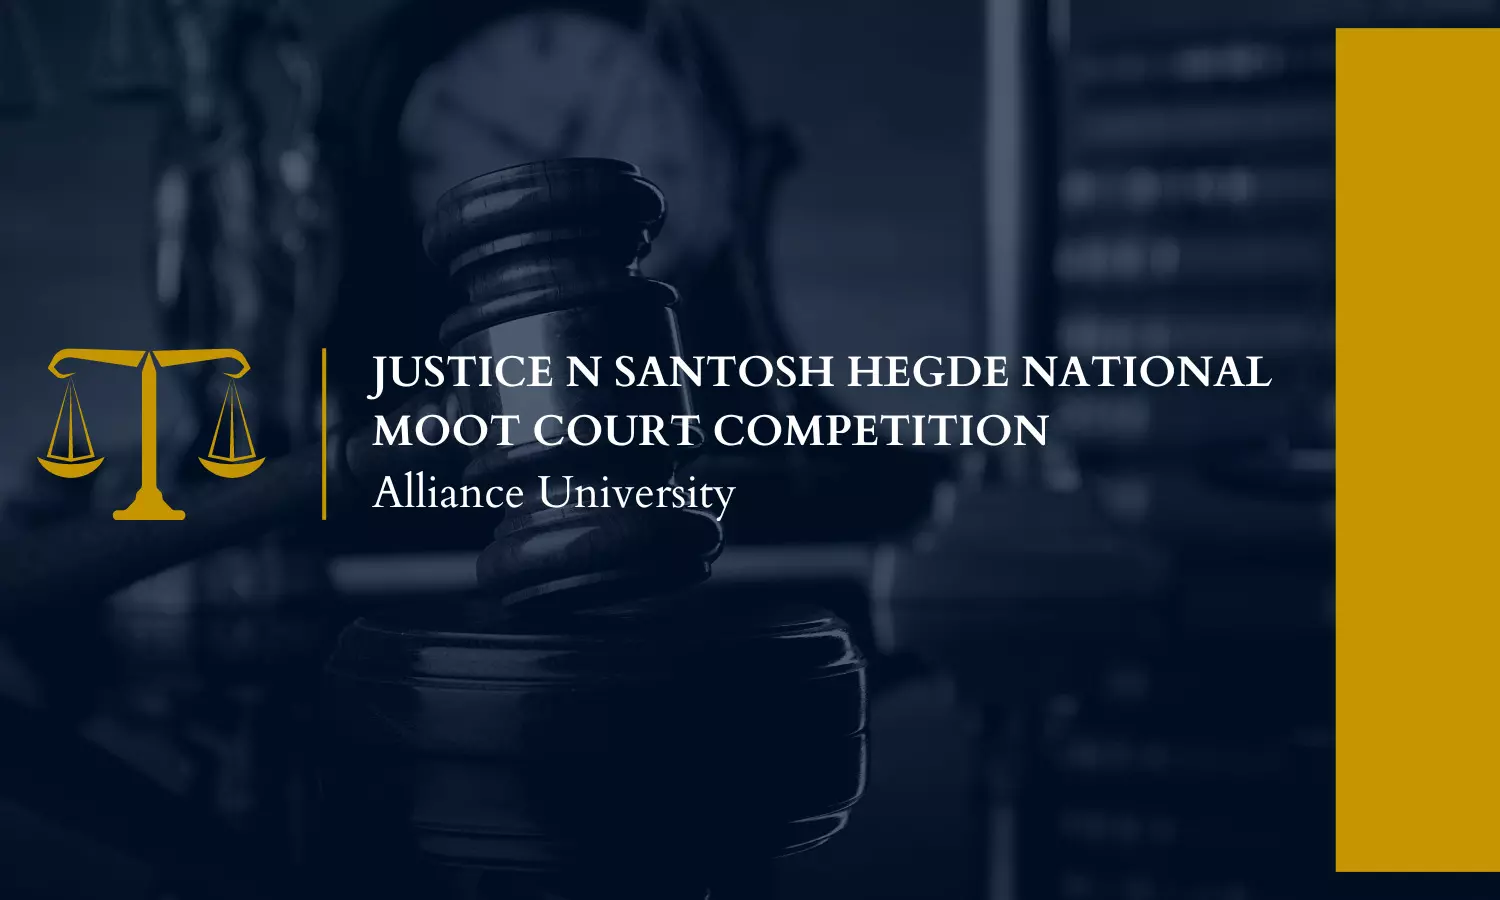 Justice N Santosh Hegde National Moot Court Competition | Alliance University | 25th - 26th February 2023